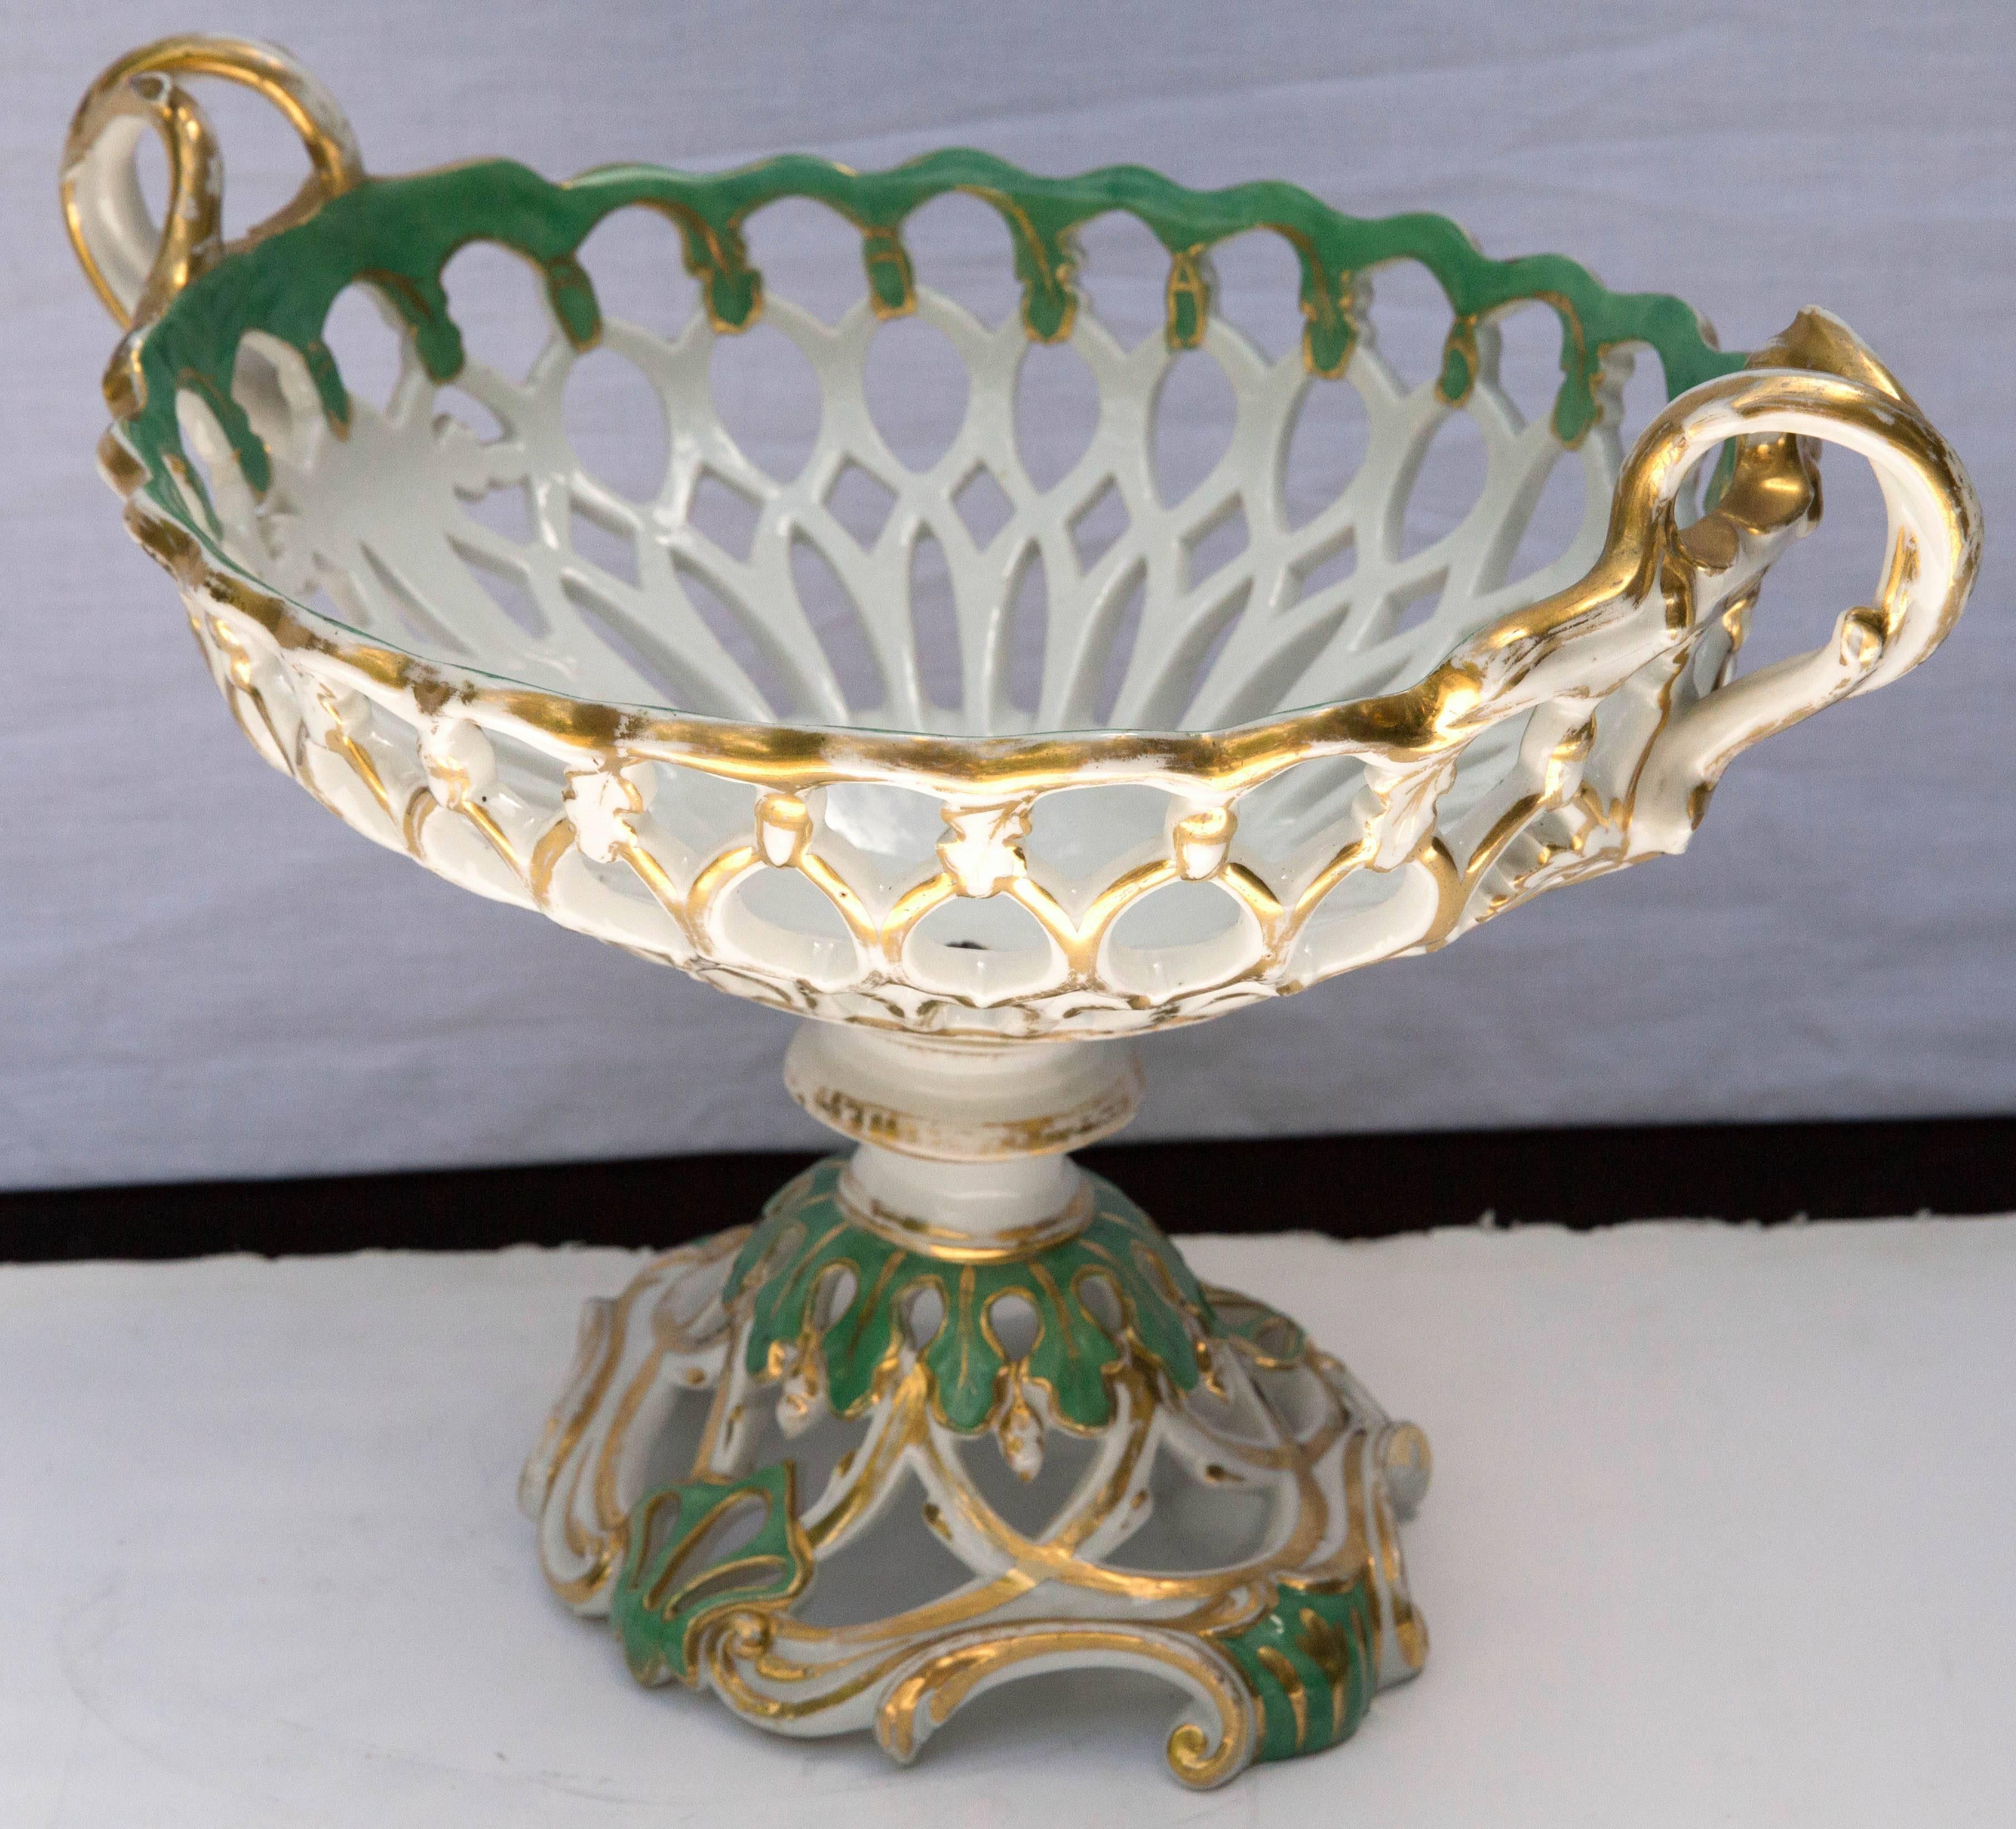 A lovely green, gilt and white glazed porcelain compote in a decorative footed basket form.